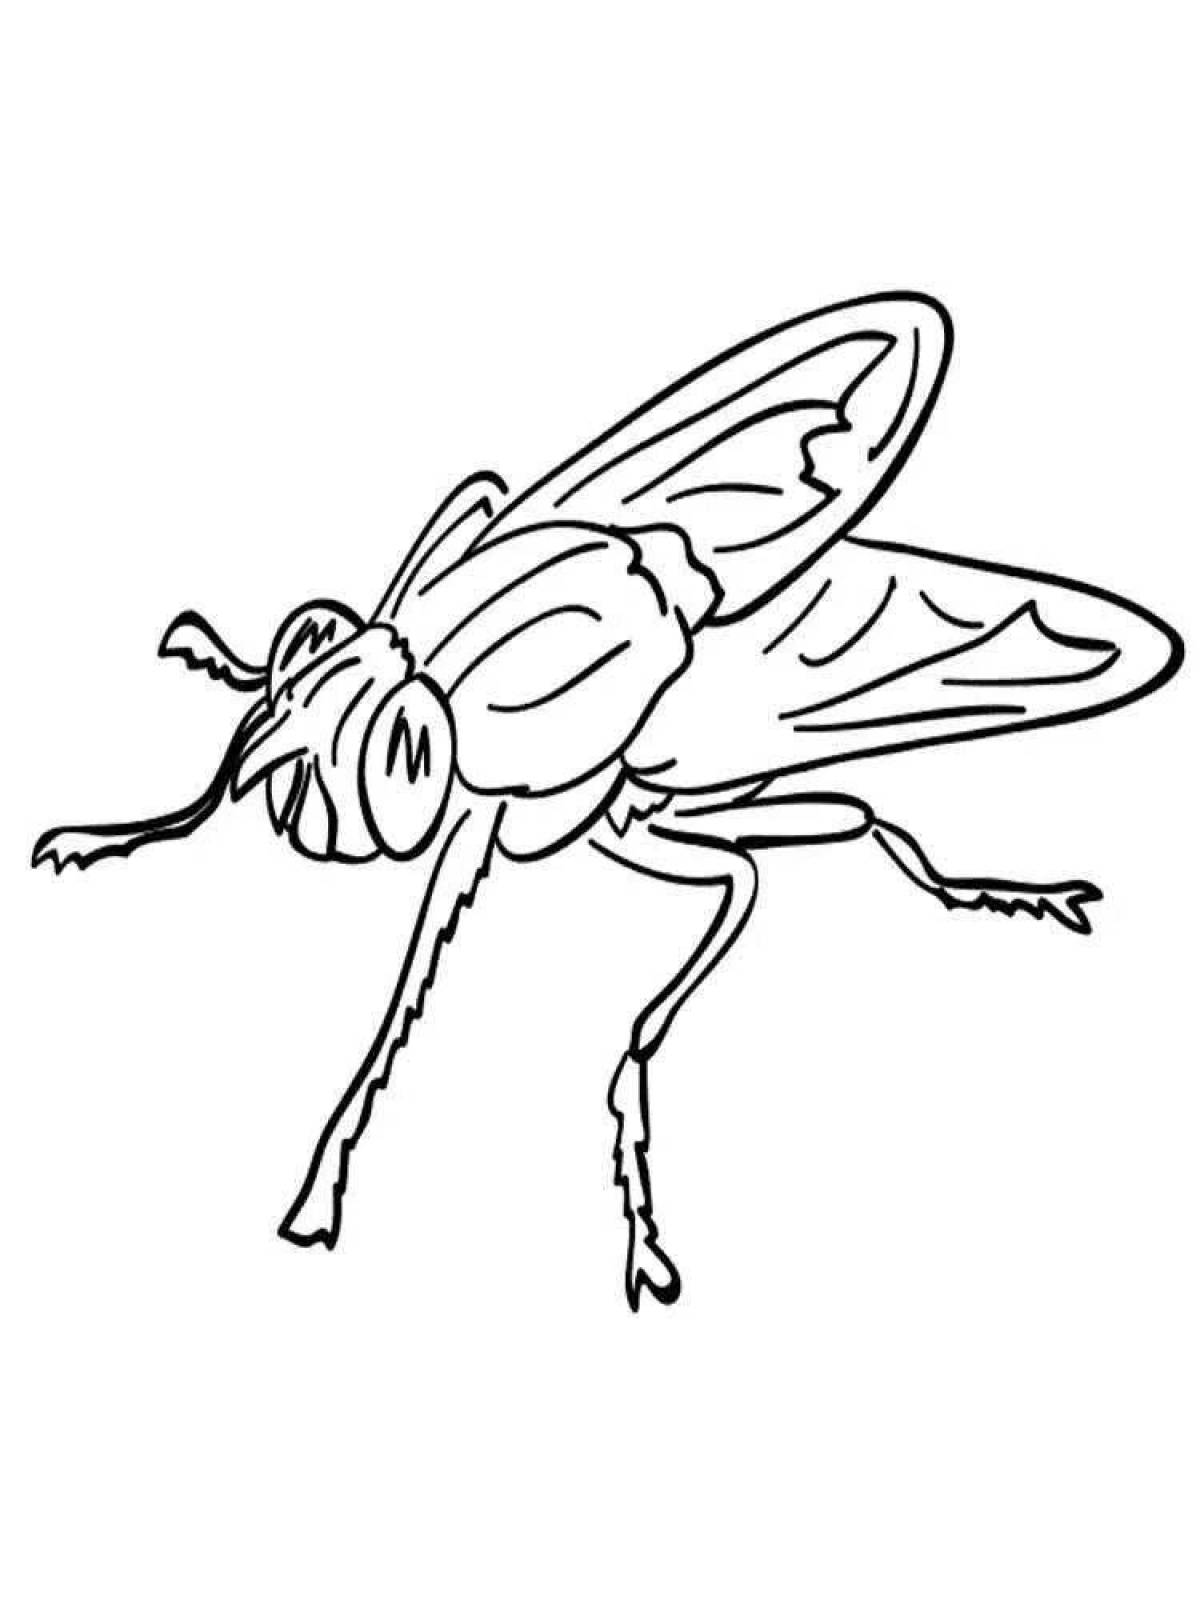 Magic fly coloring book for kids